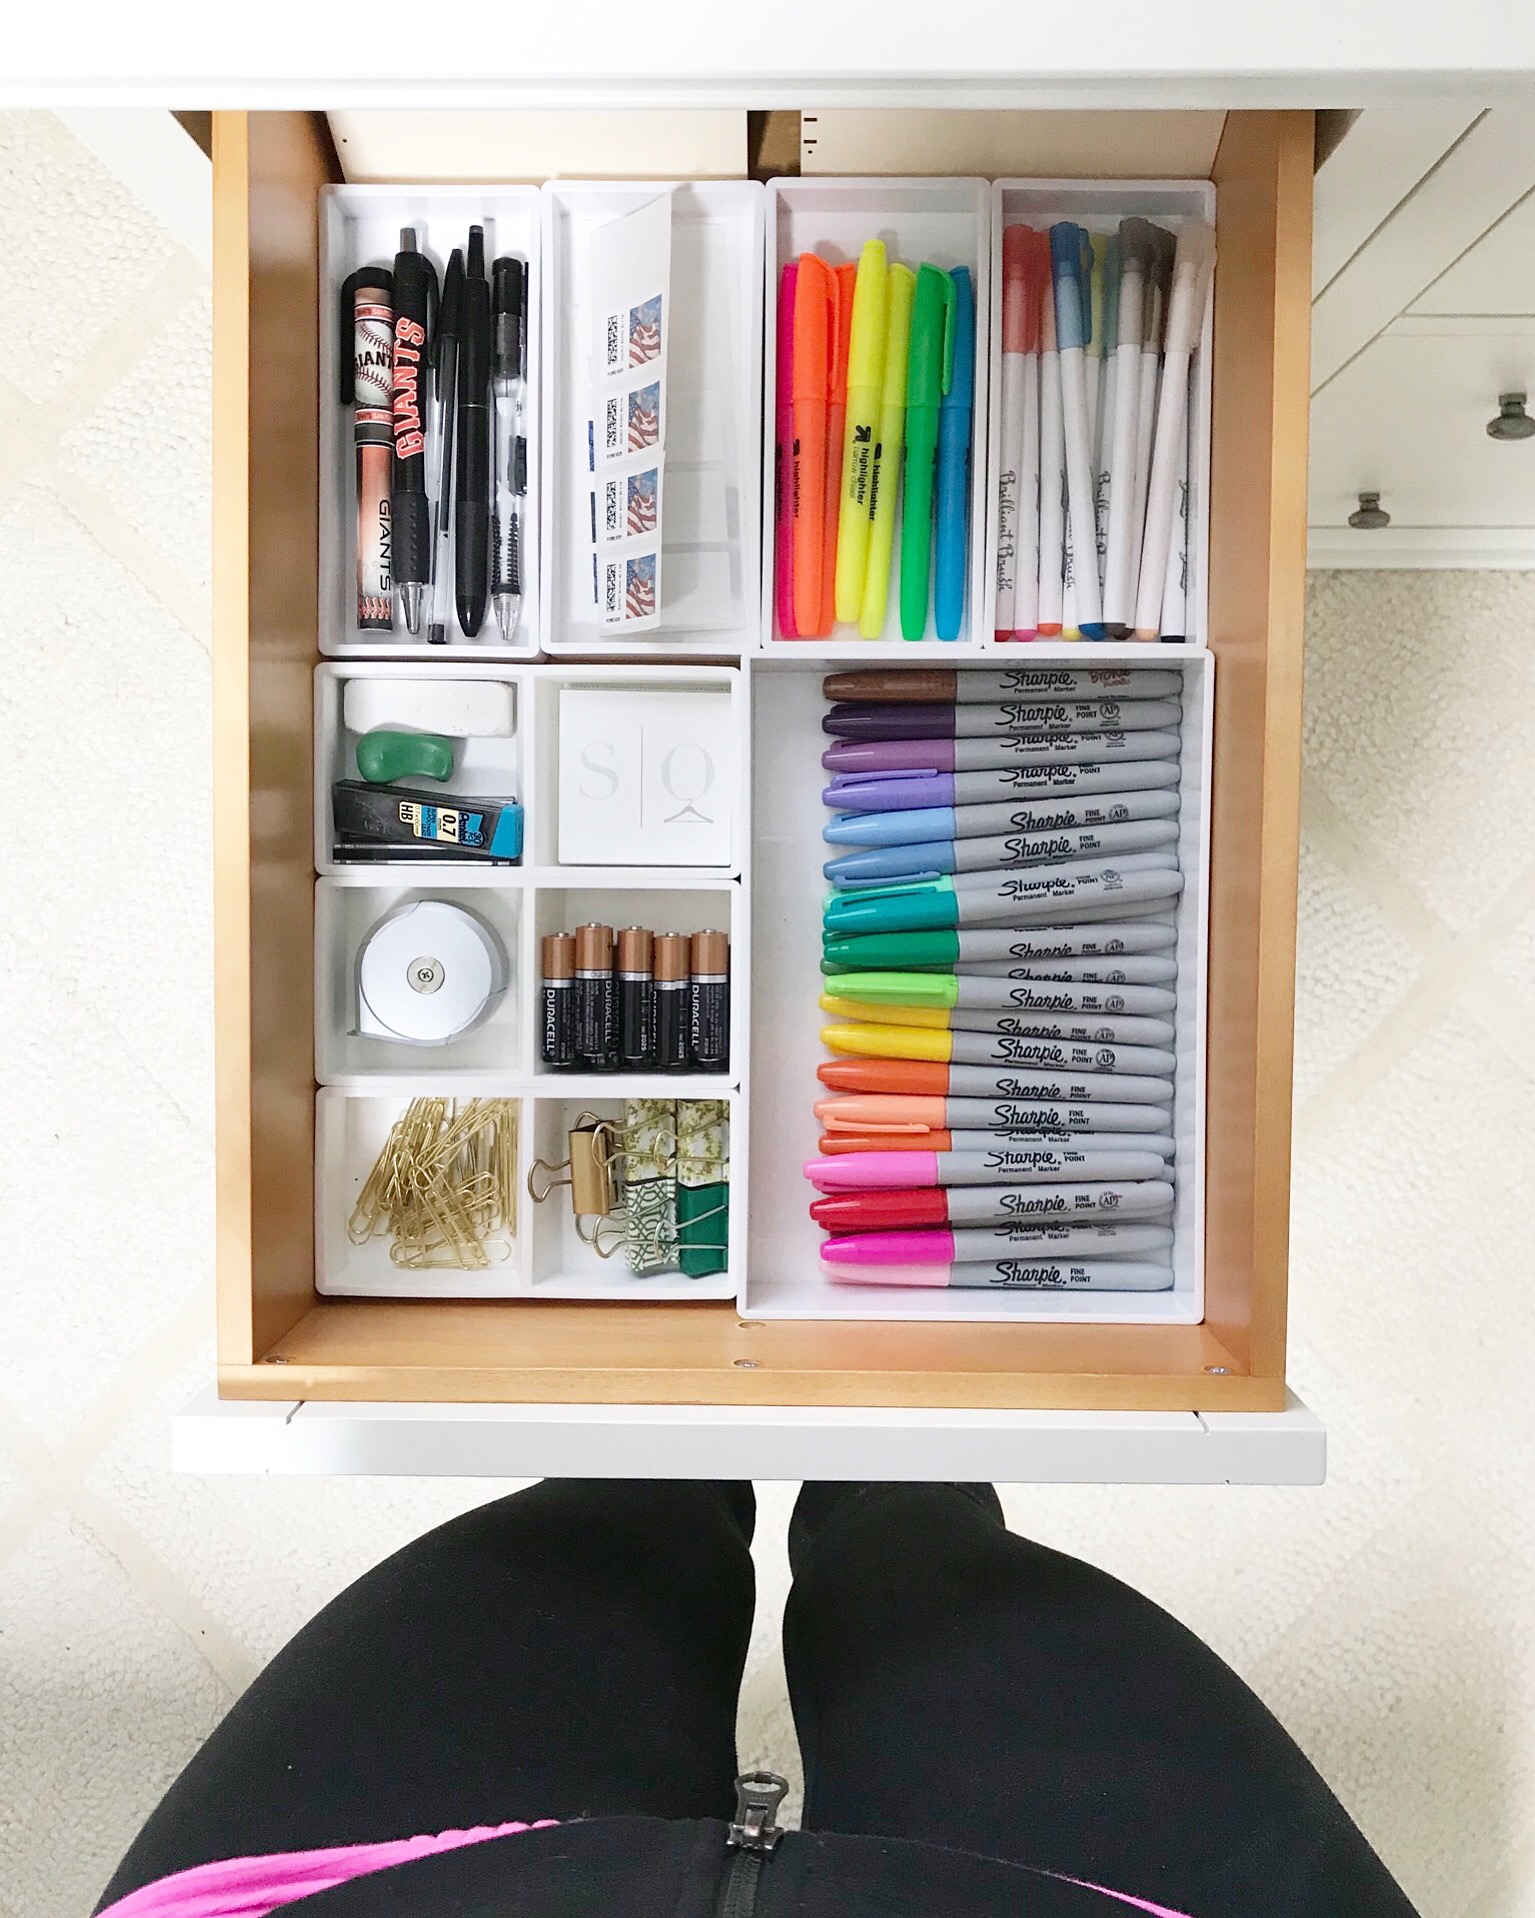 https://simplyorganized.me/wp-content/uploads/2017/12/Simply-Organized-Home-Office-Organized-Drawer-with-Sharpies.jpg